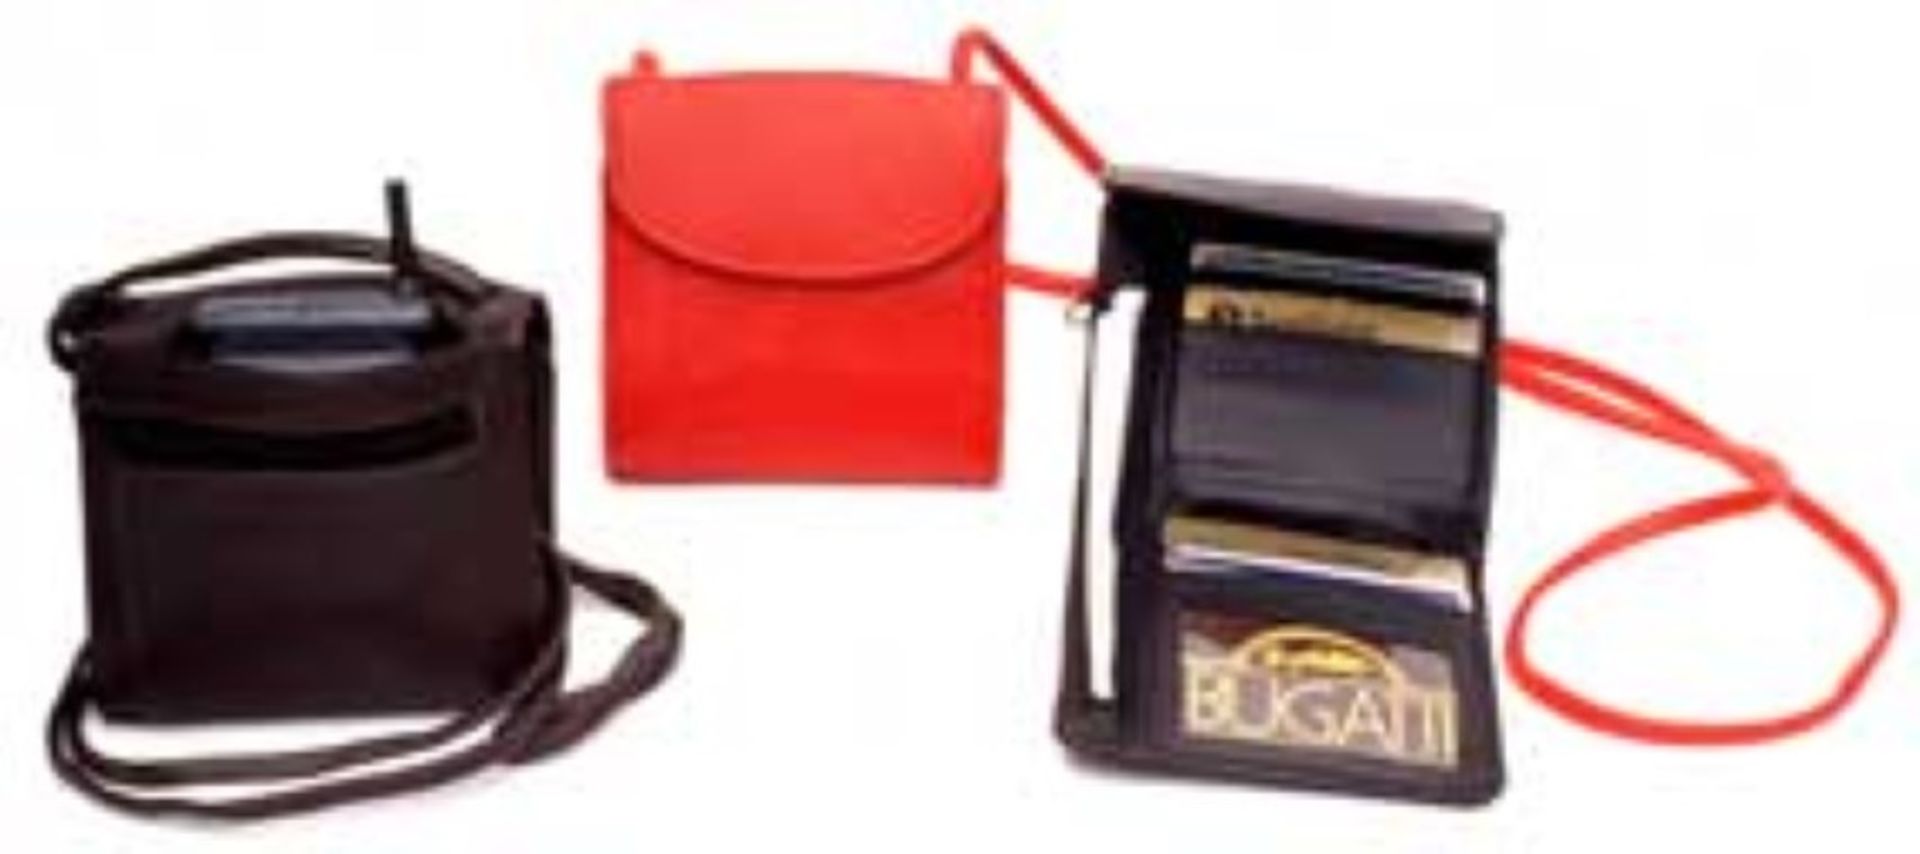 (25) Leather wallet with shoulder strap and a pocket for cellular phone. Snaps open to credit card